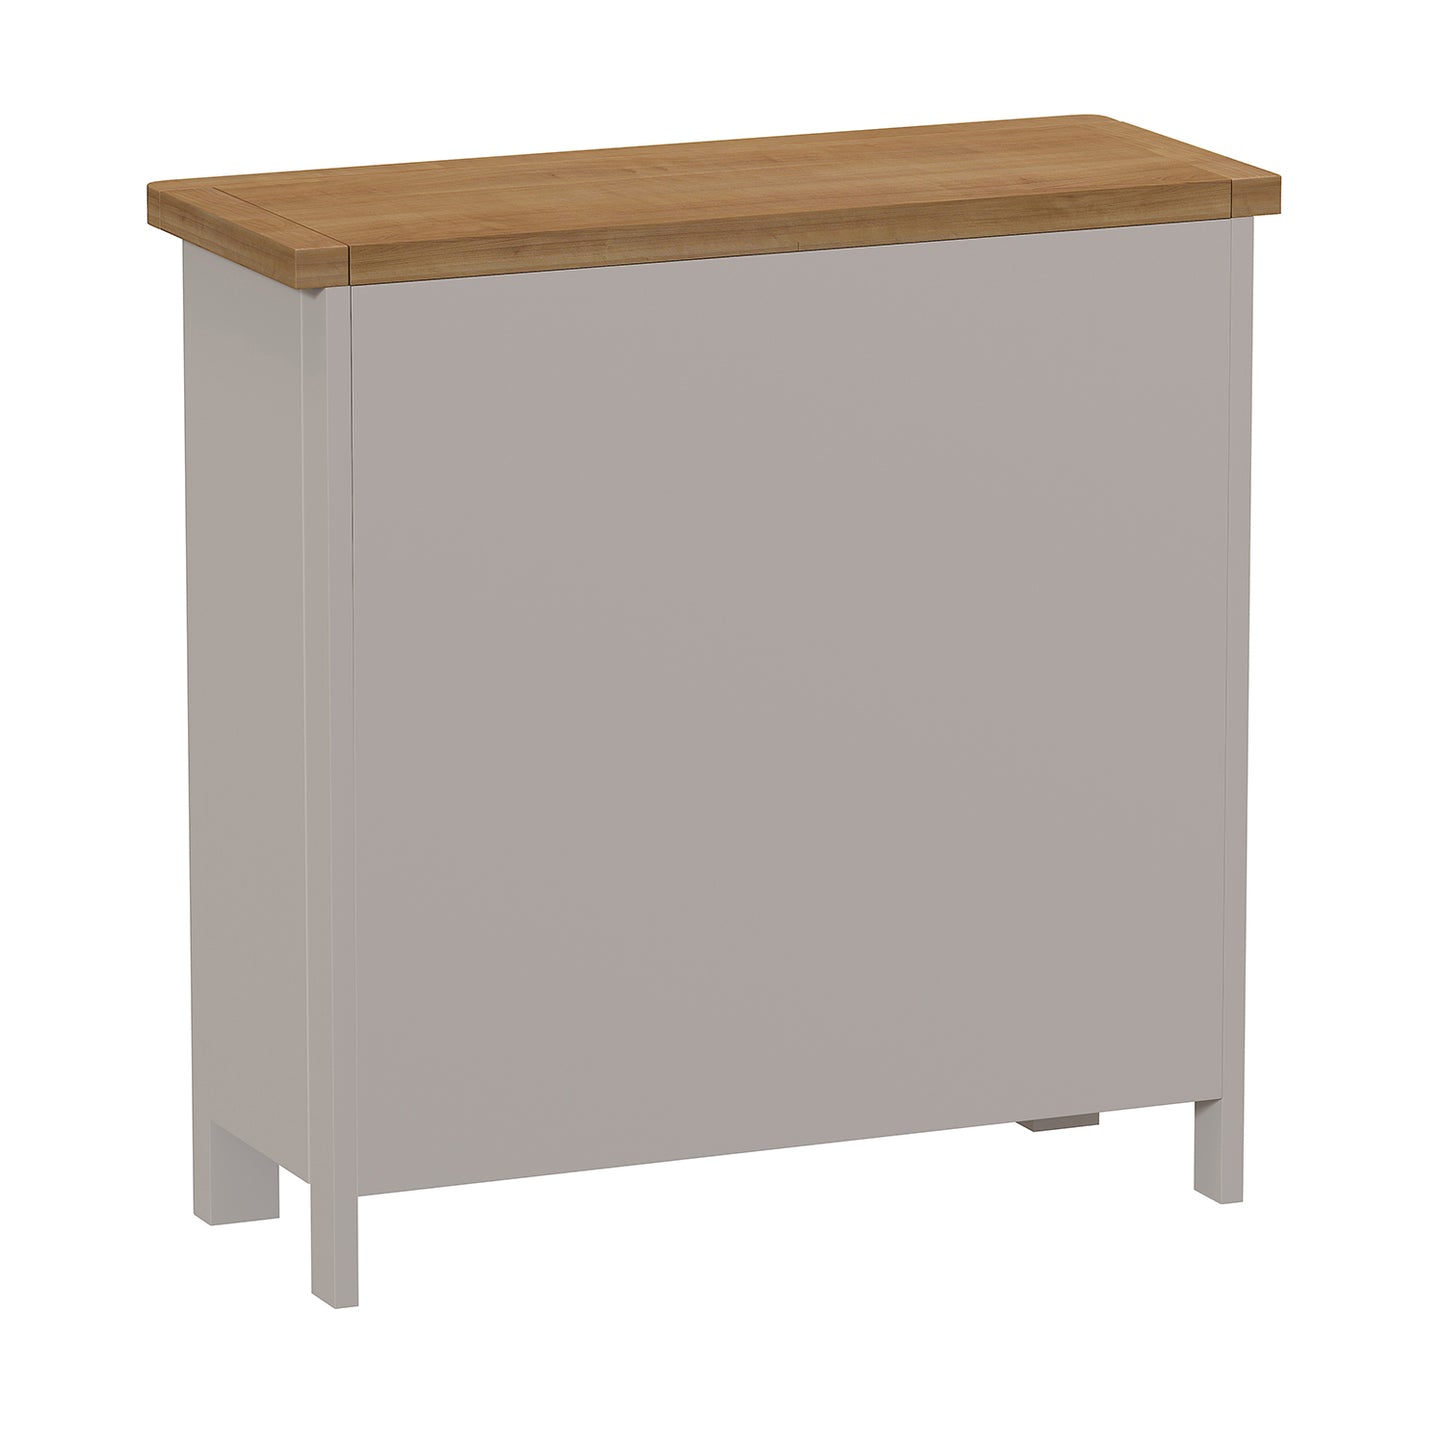 Pershore Painted Sideboard - Small